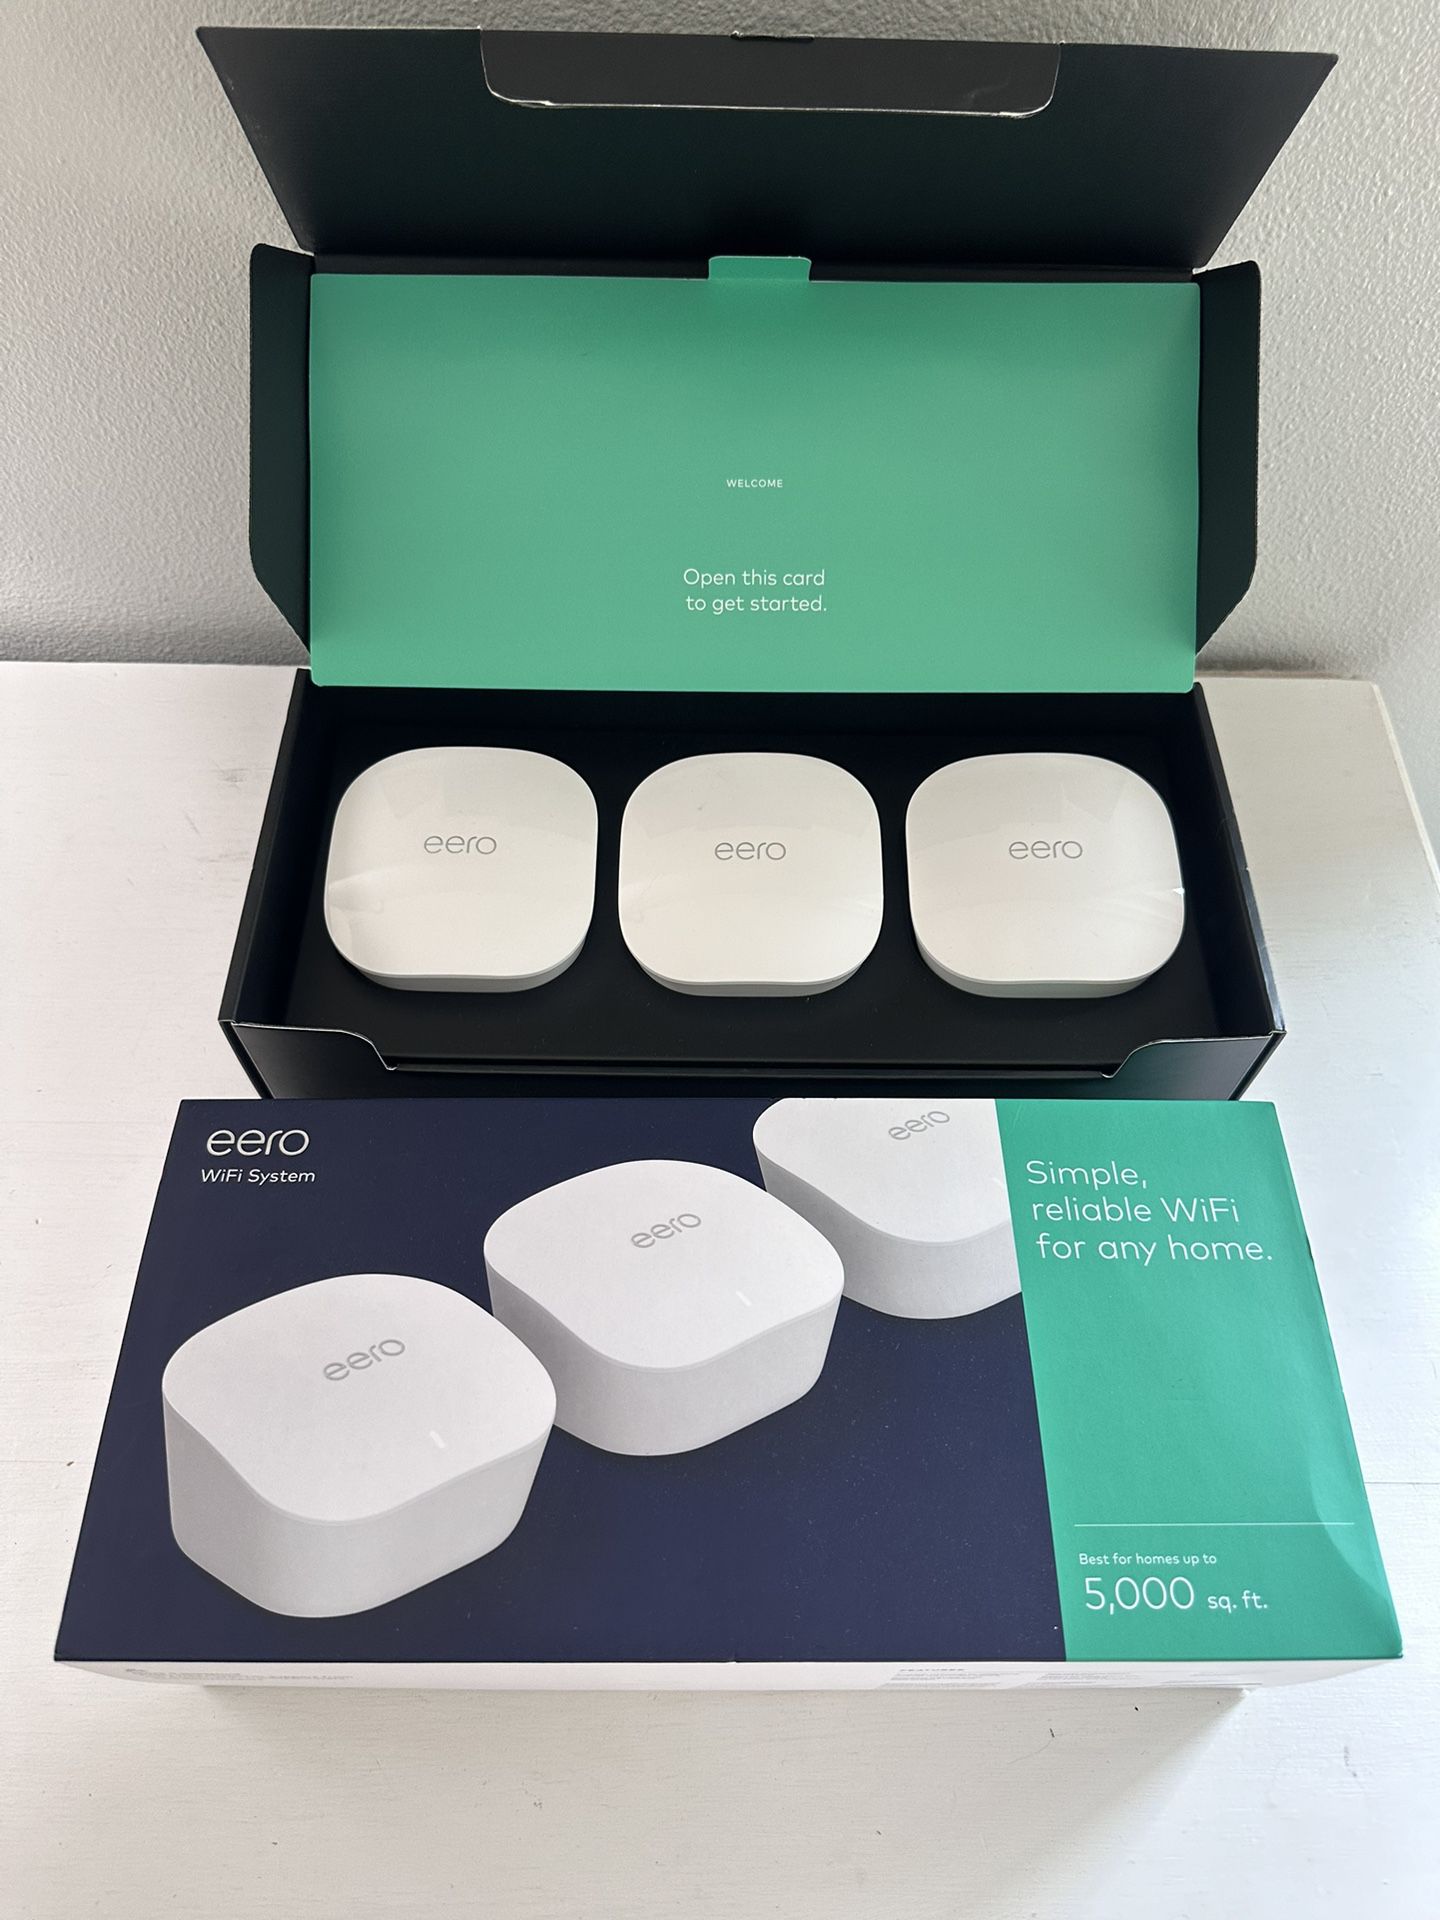 eero WiFi System Dual Band Mesh Router Signal Extender Set 3 Pack J010311 LIKE NEW